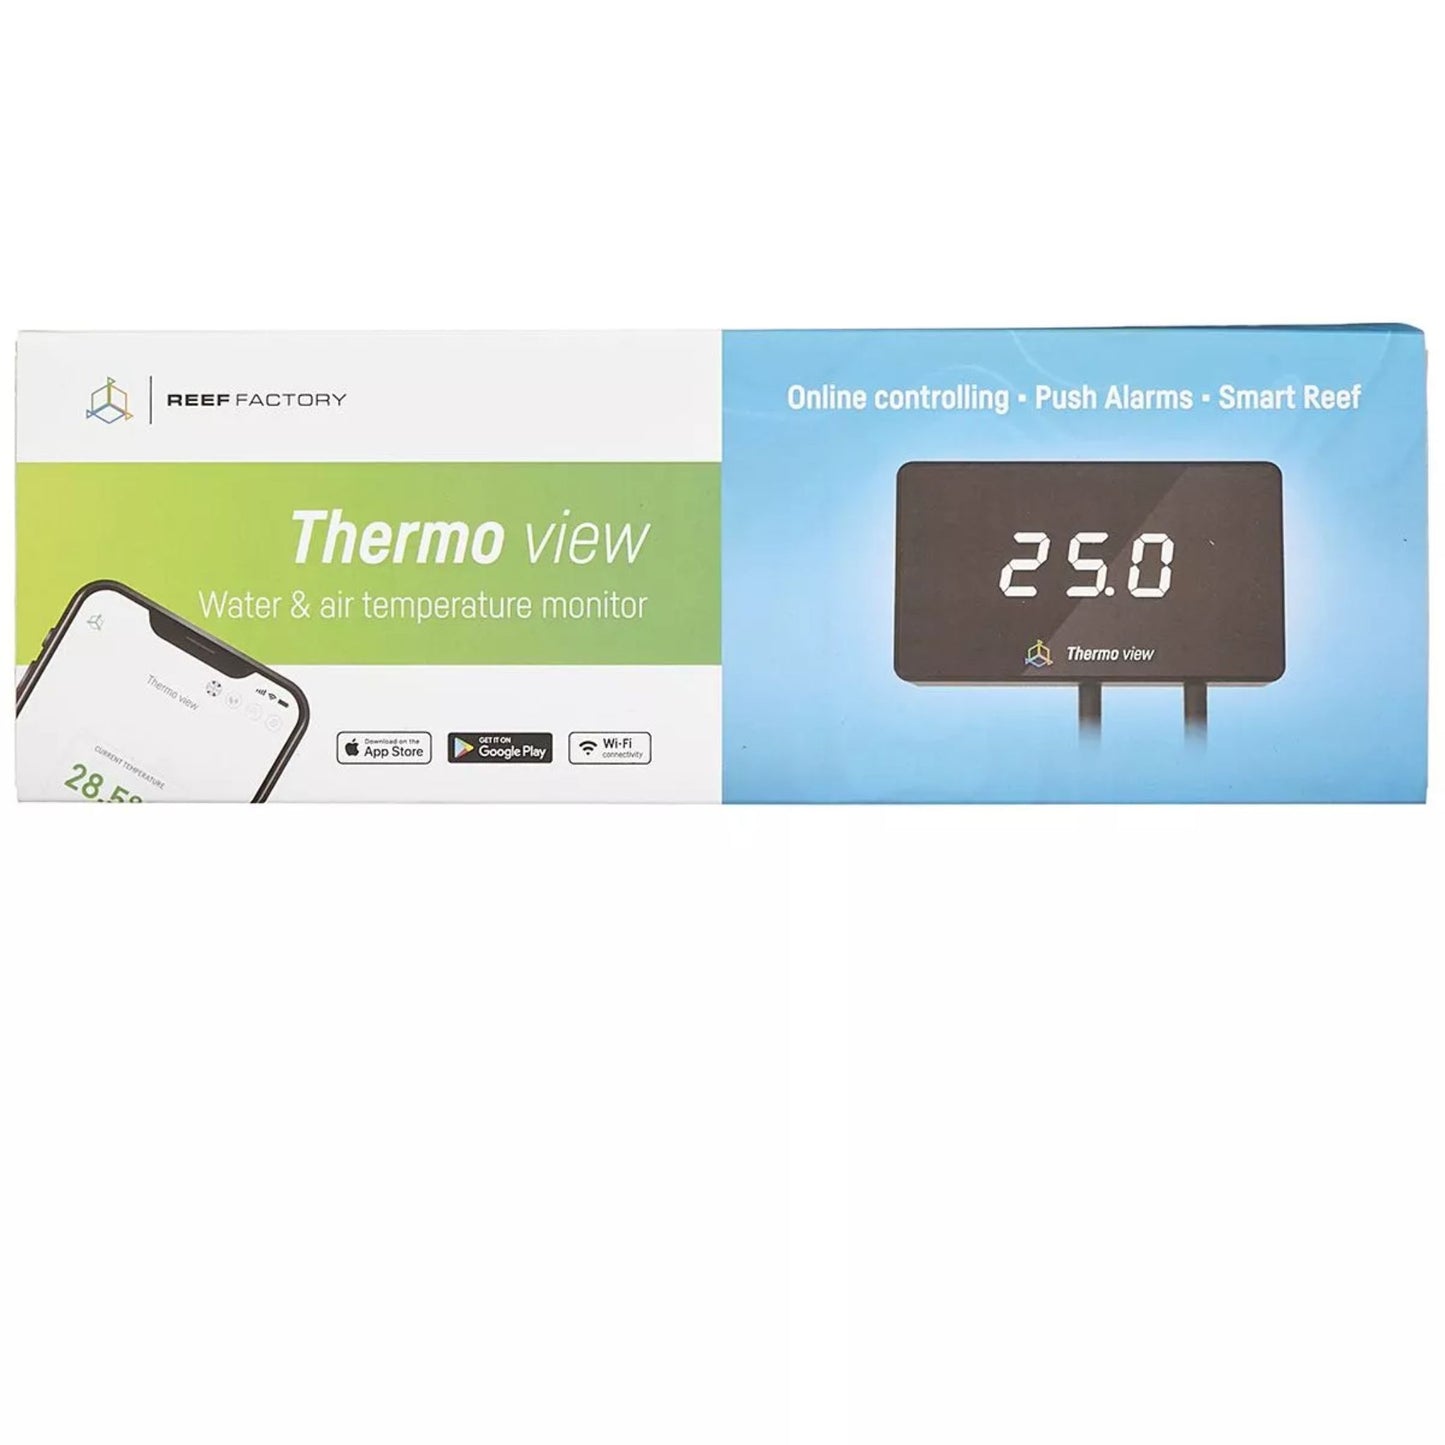 Thermo View Temperature Monitor - Reef Factory